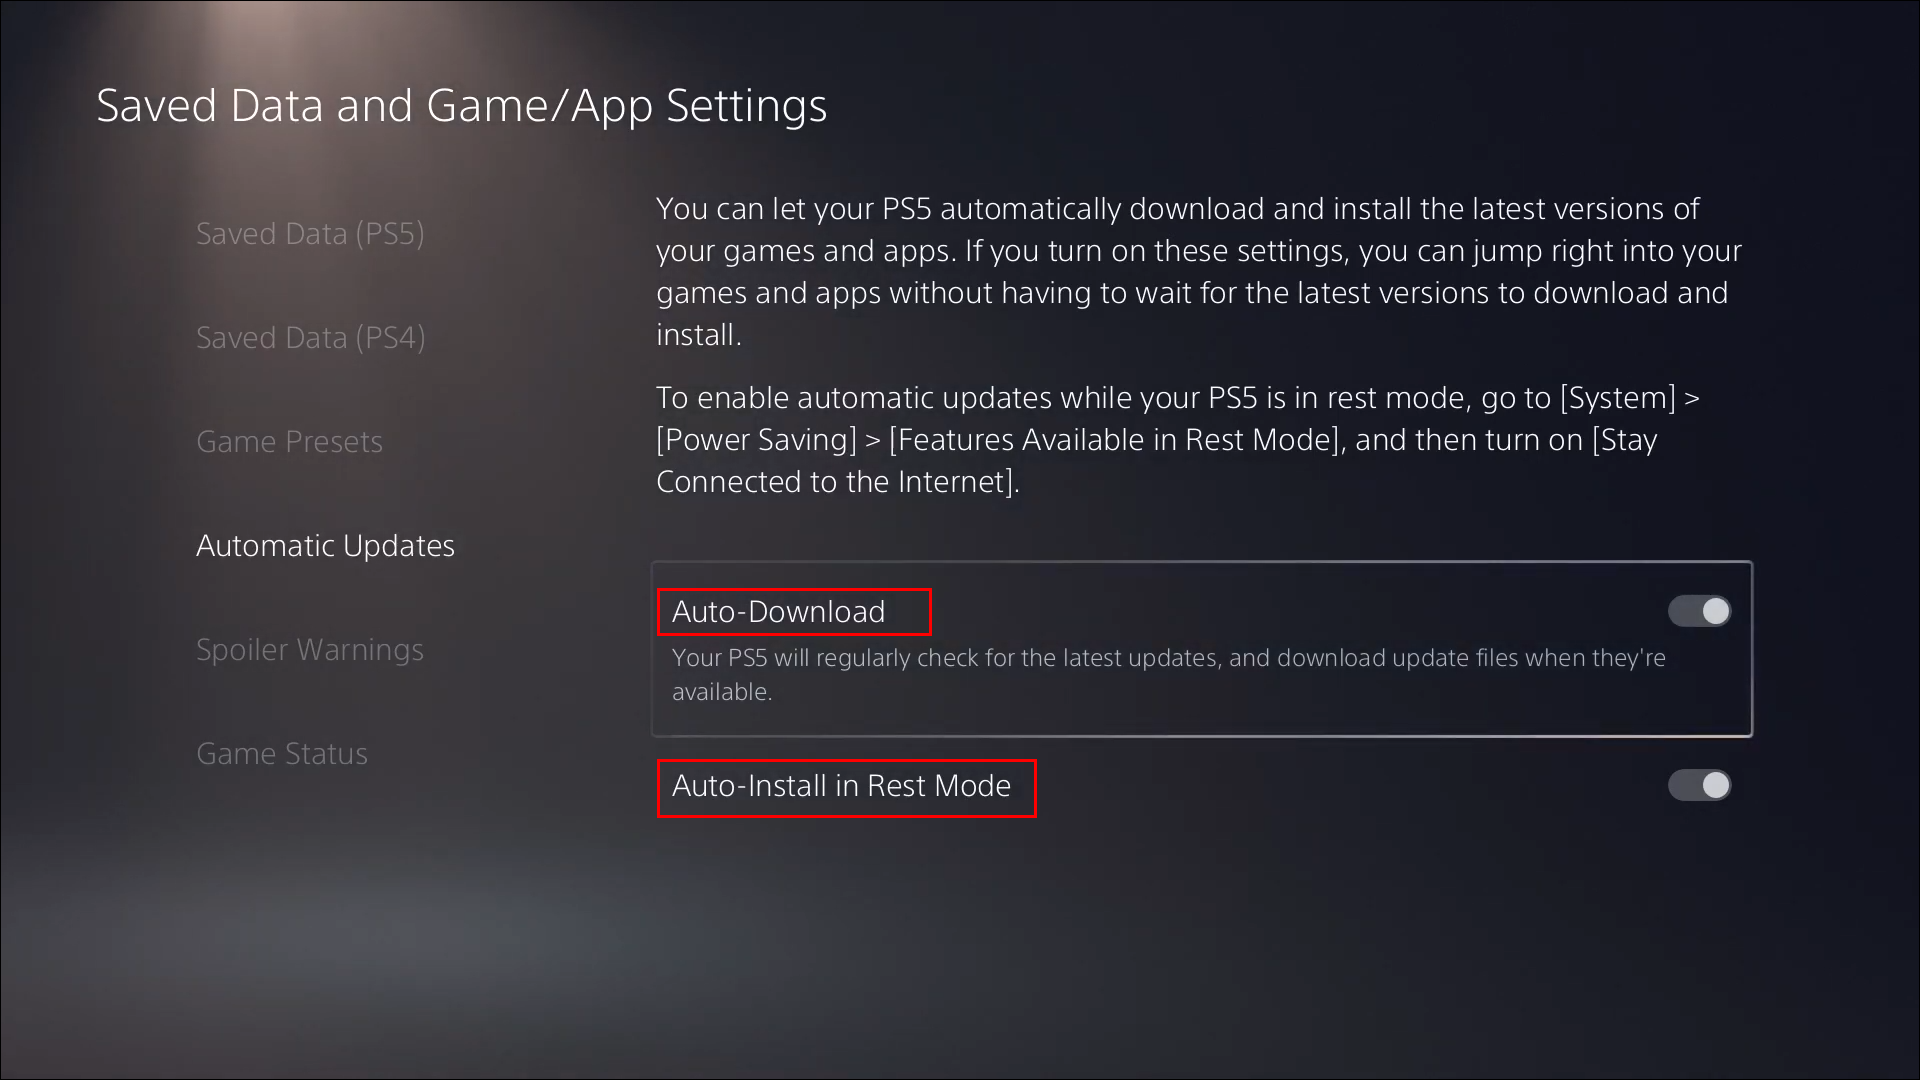 Check for game updates
Launch the game and navigate to the settings menu